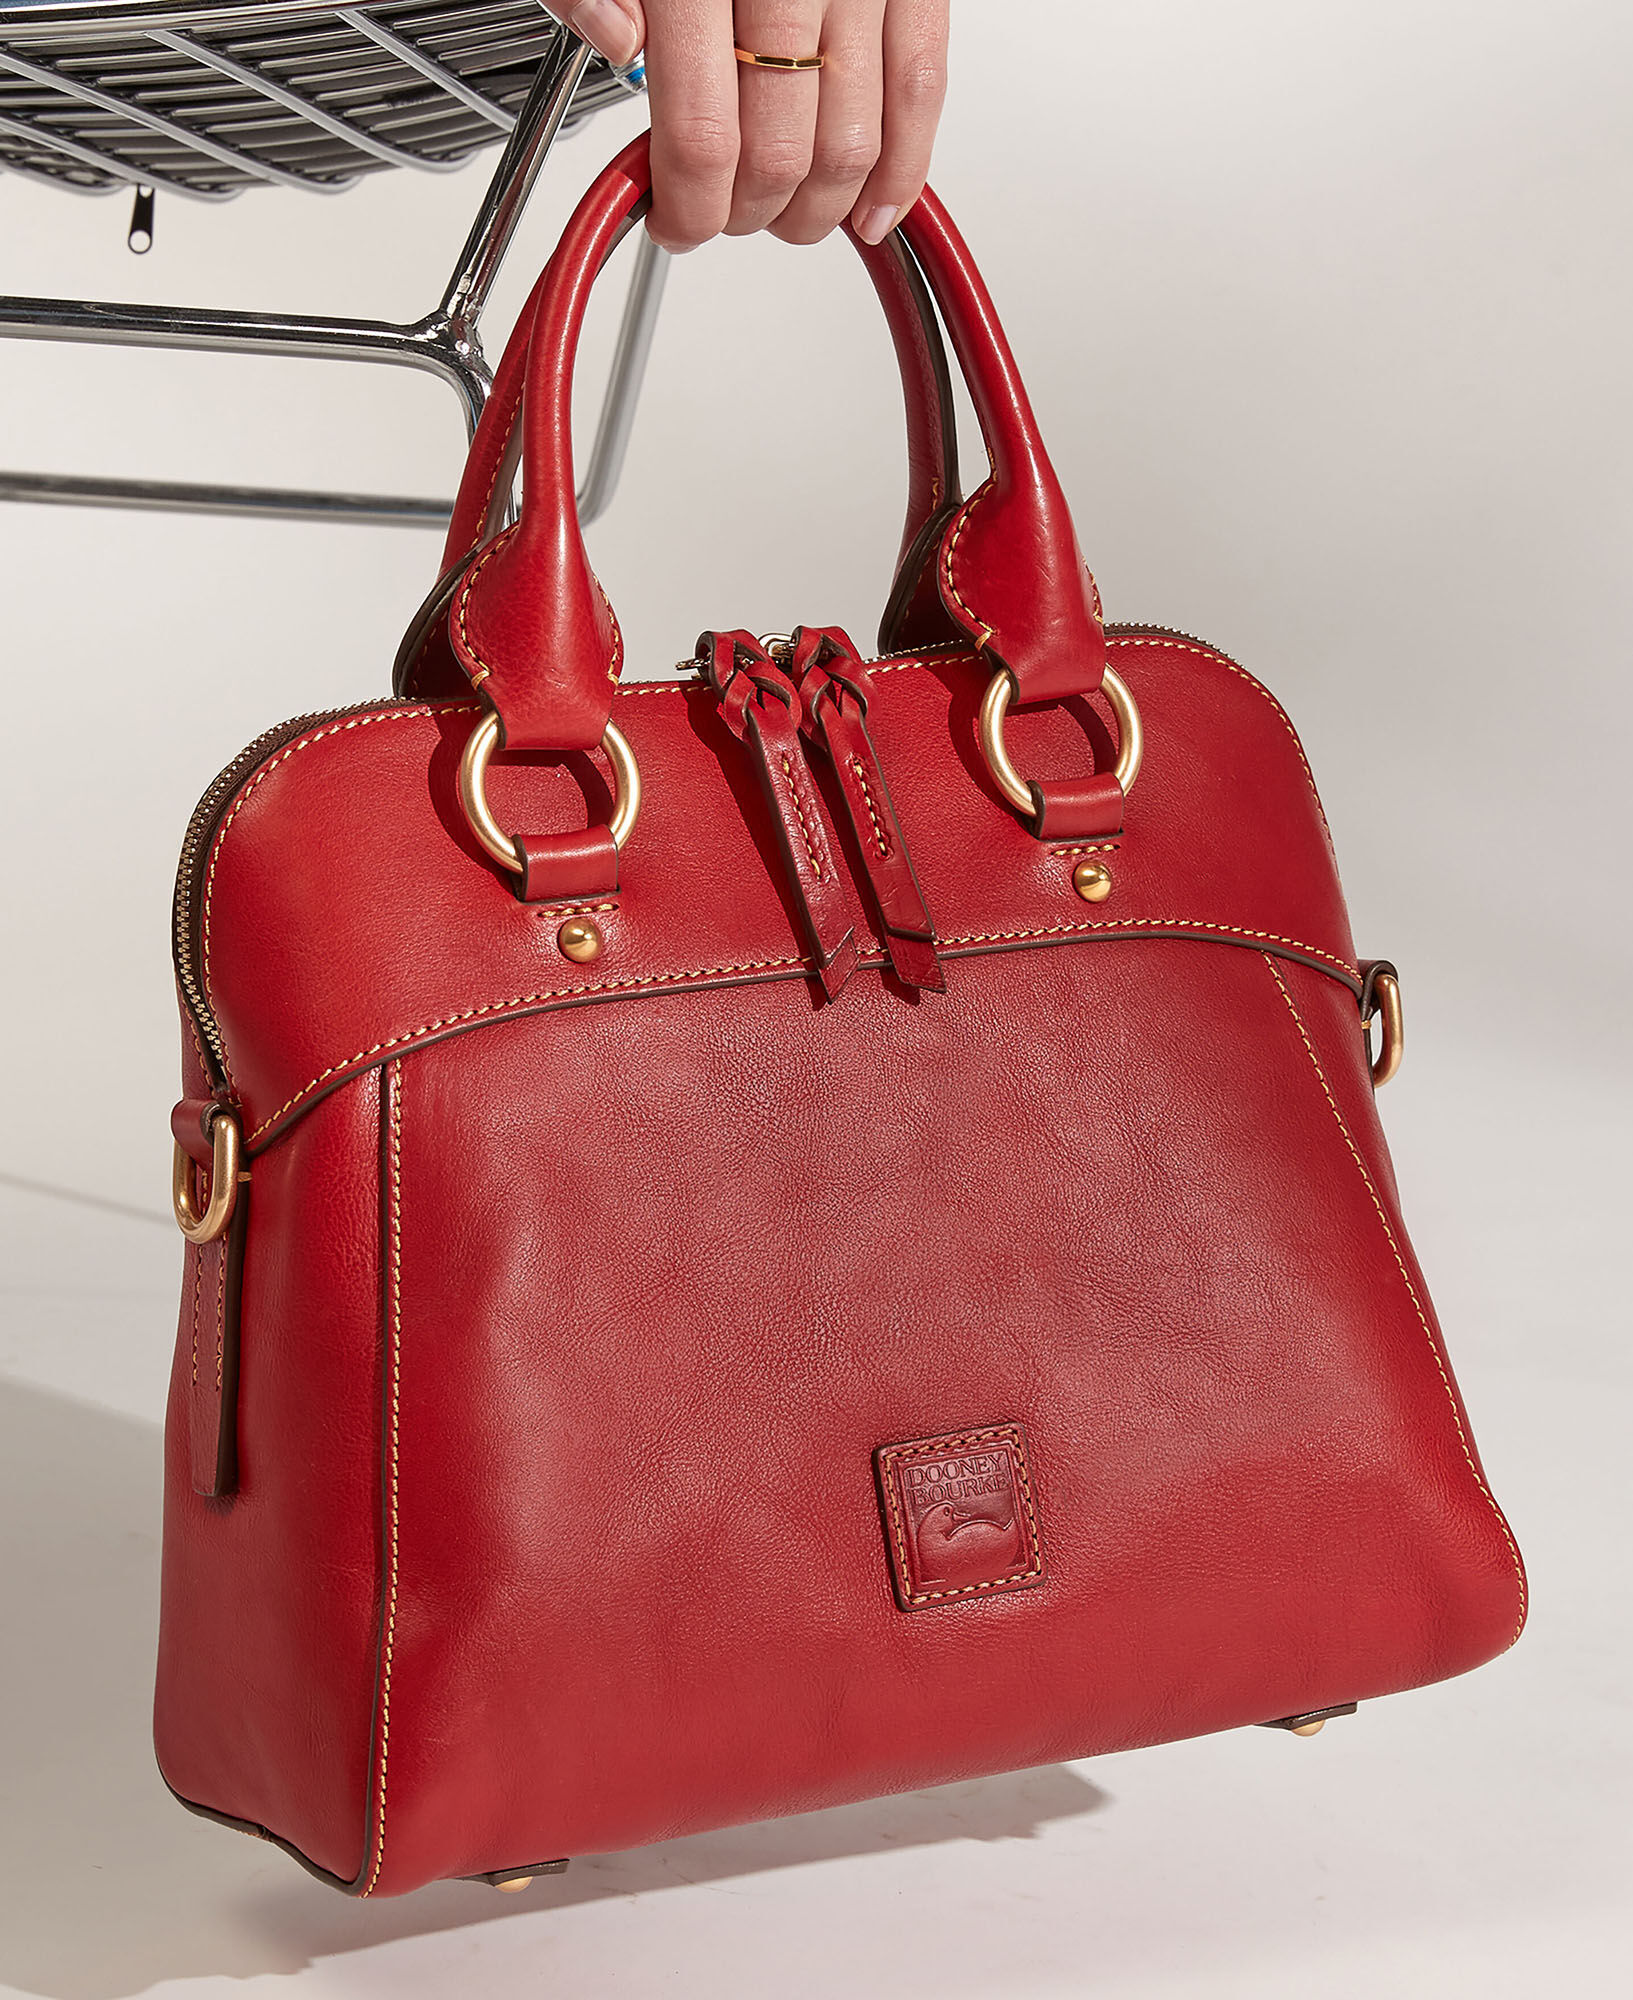 DOONEY AND BOURKE— FLORENTINE CAMERON in the color Salmon- REVIEW